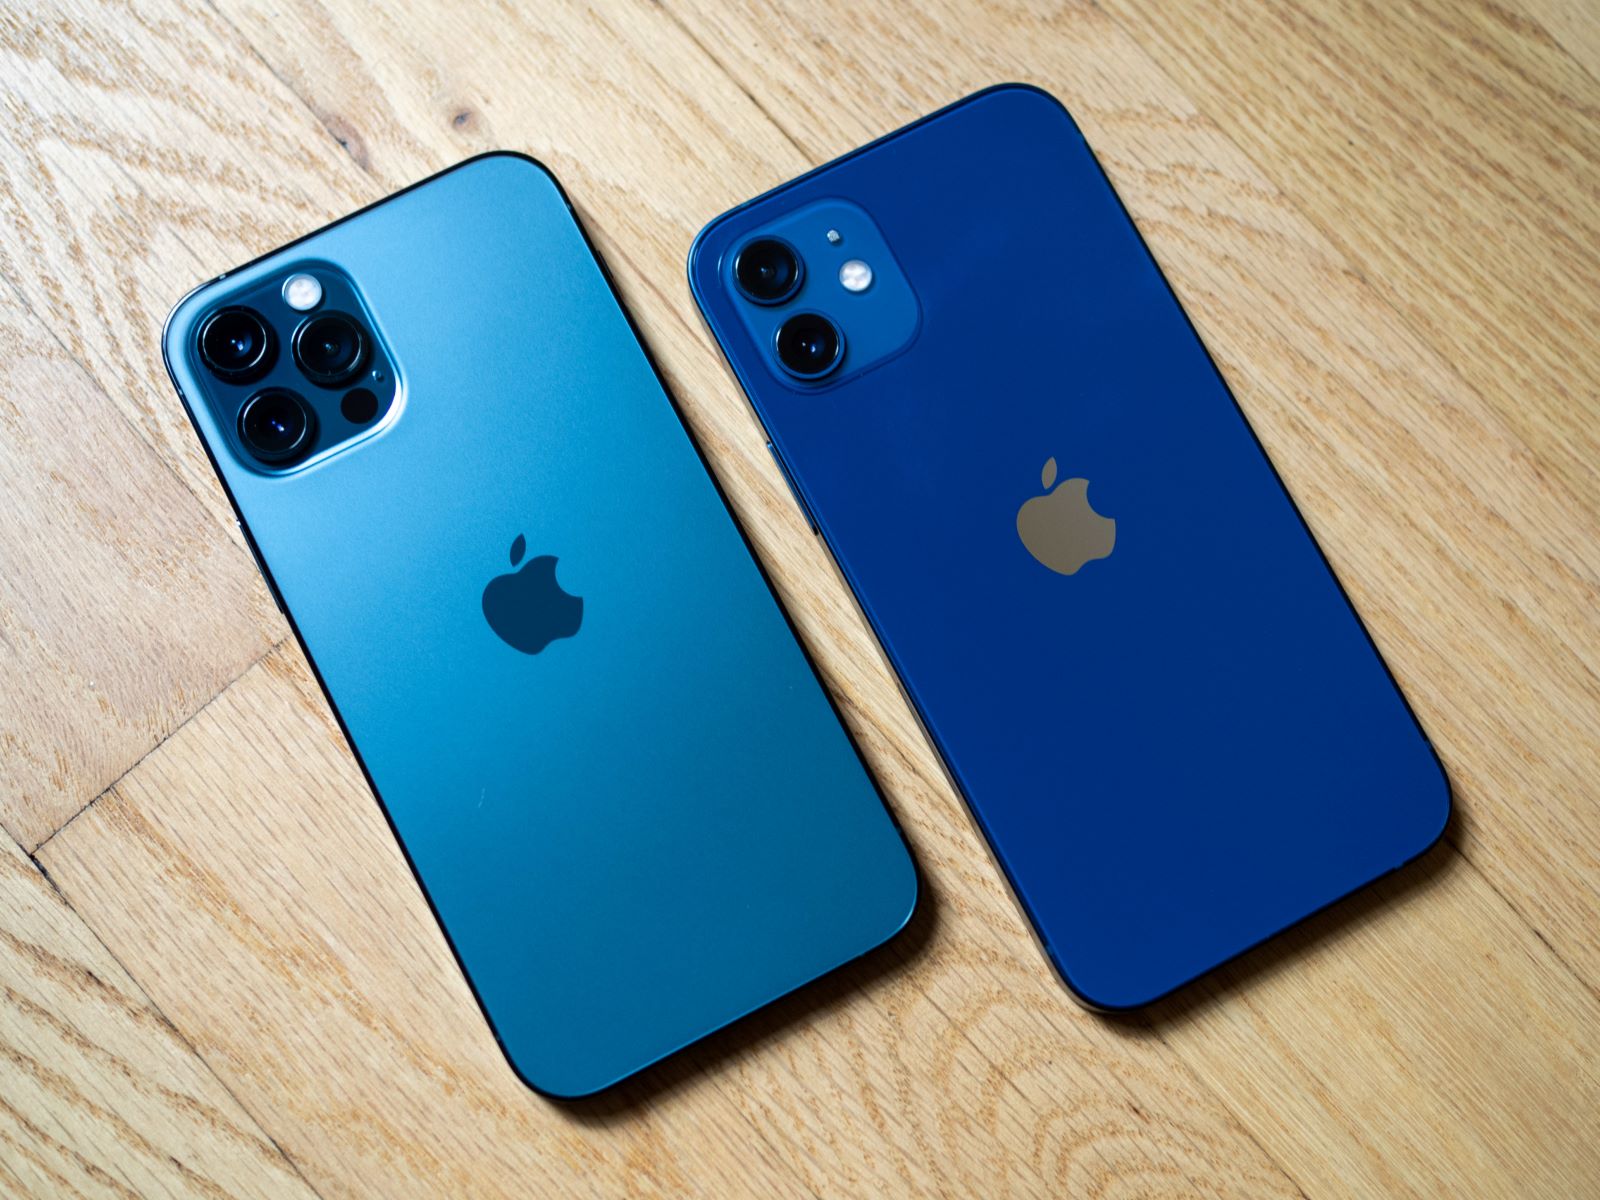 Master The IPhone 12 & 12 Pro: Unlock Hidden Modes And Power Tips!